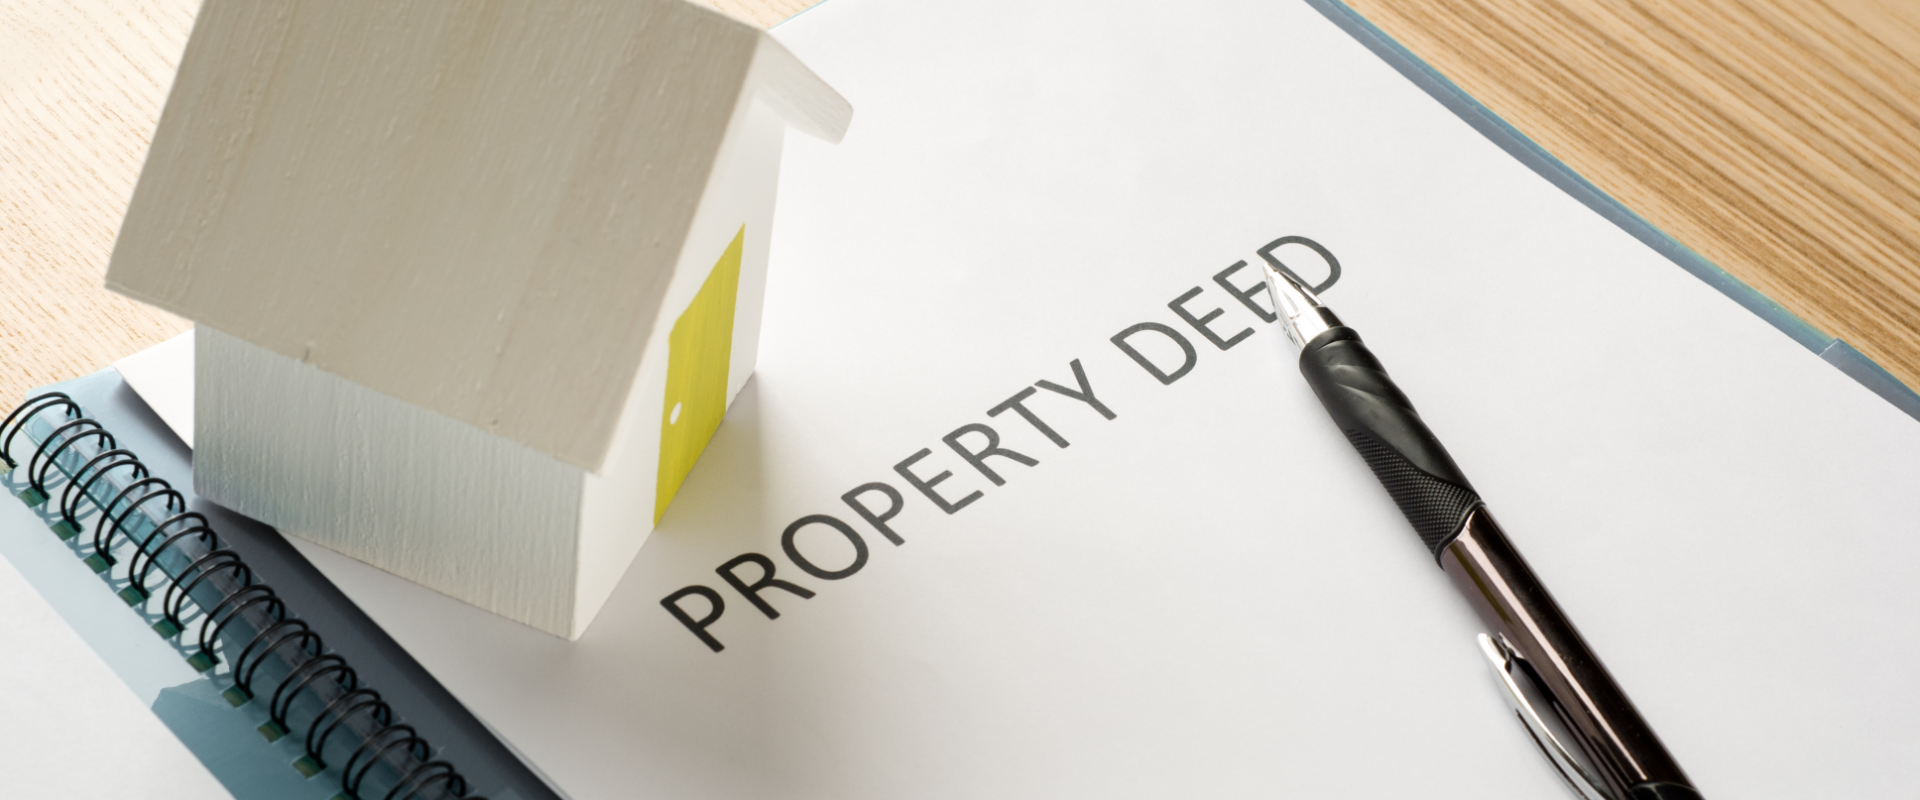 Property Deed and Pen on Table Indicating Estate Transfer Steps in Ohio